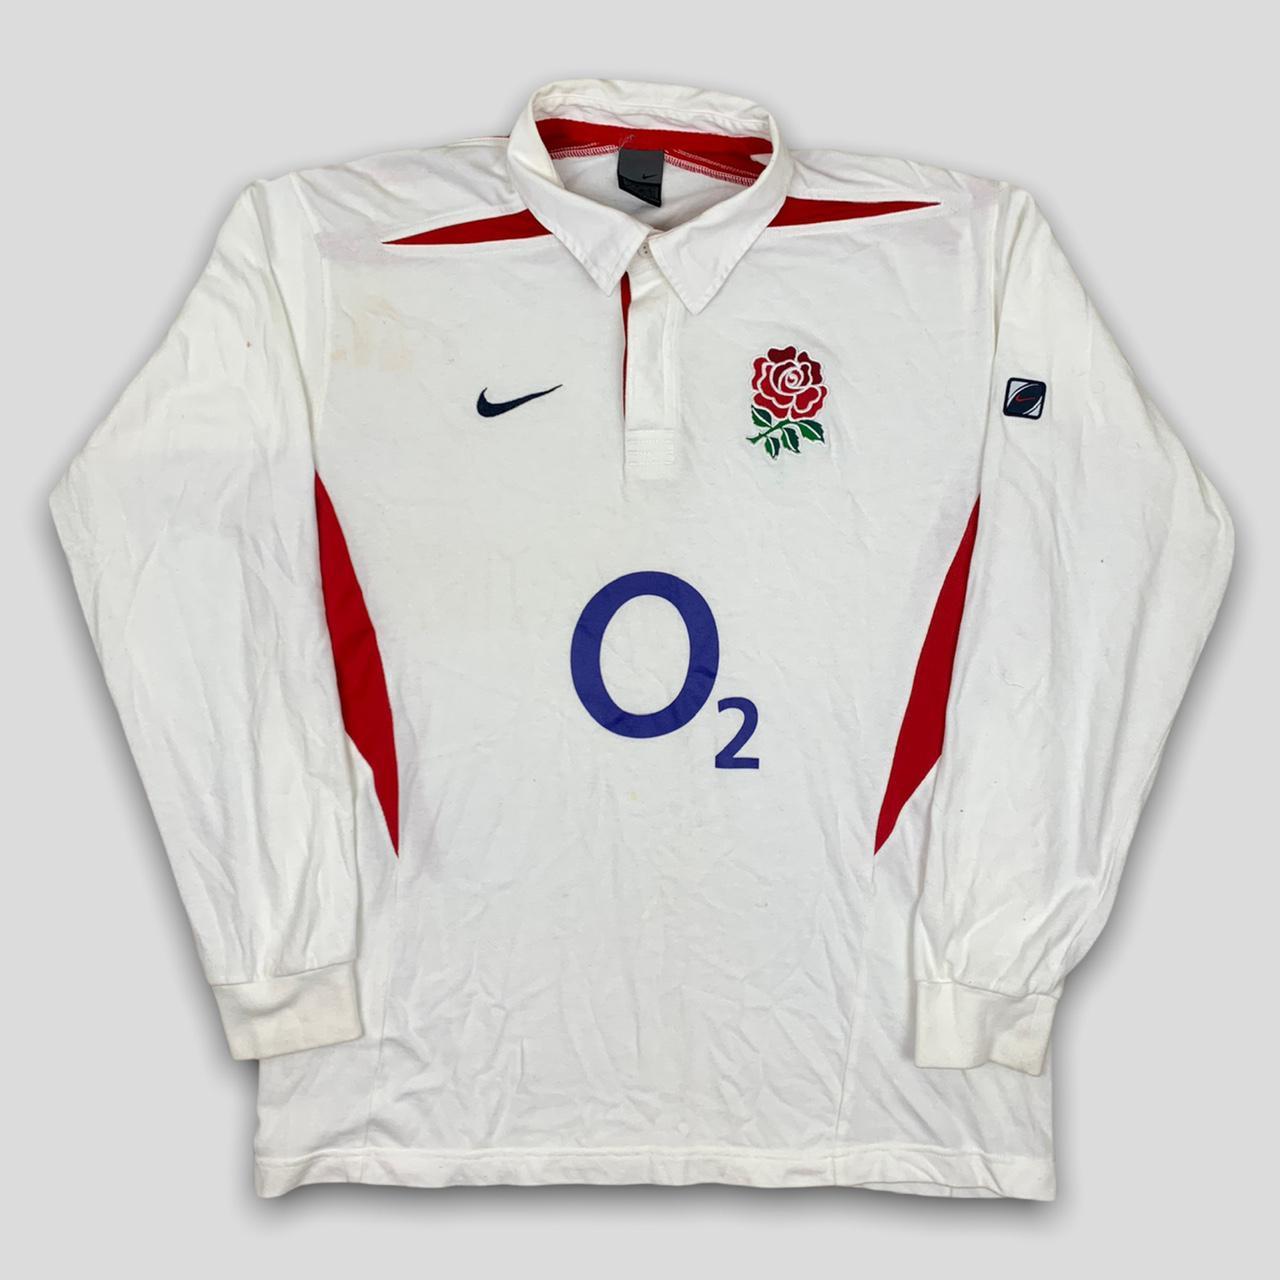 Vintage England Rugby shirt 0521 - Early 2000’s... - Depop